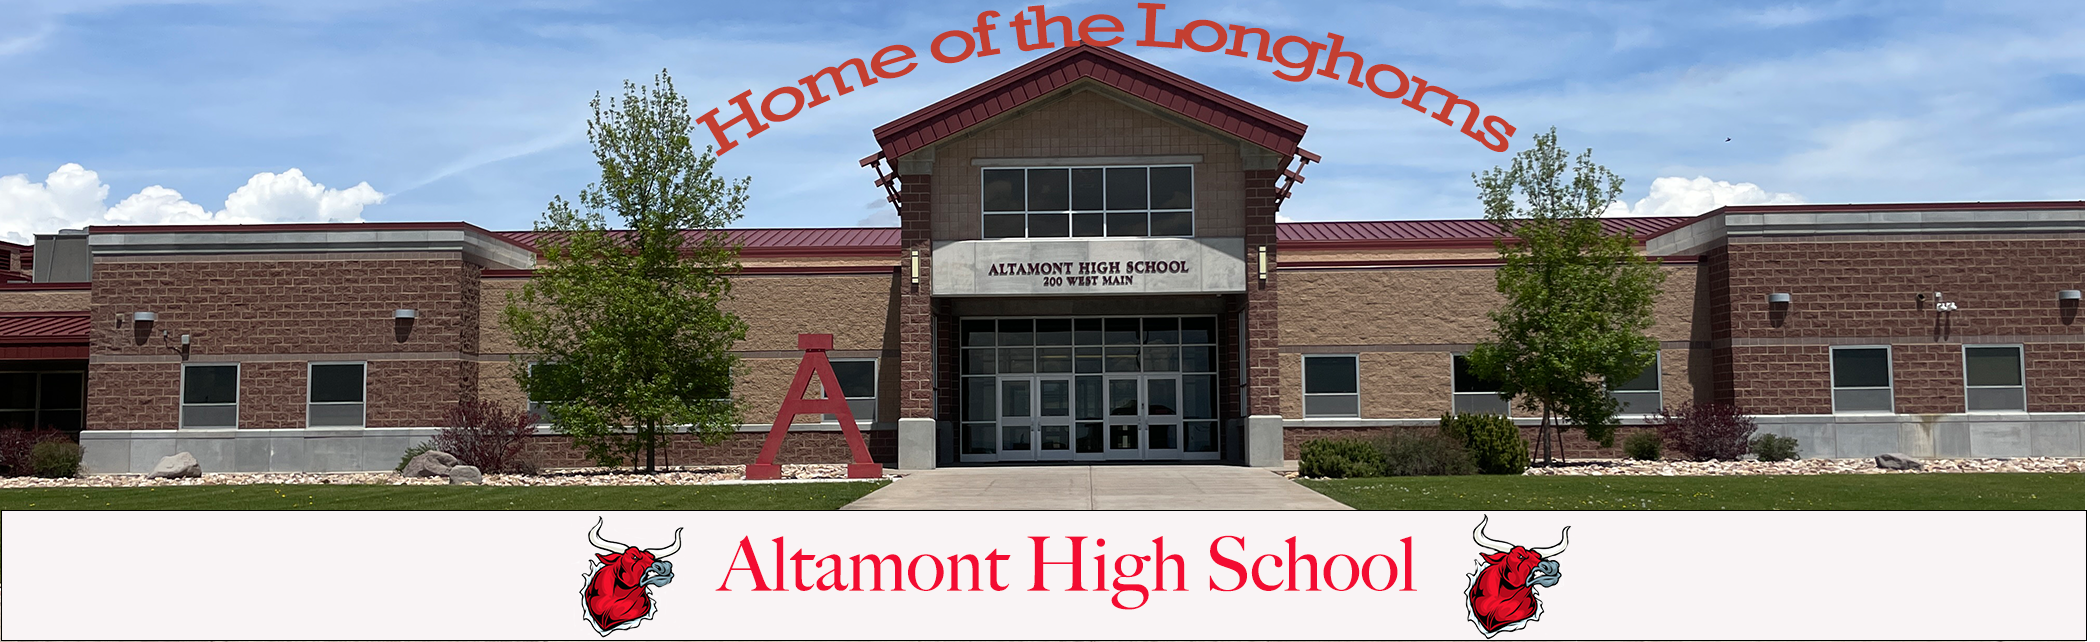 school in background with logo in foreground Altamont high school